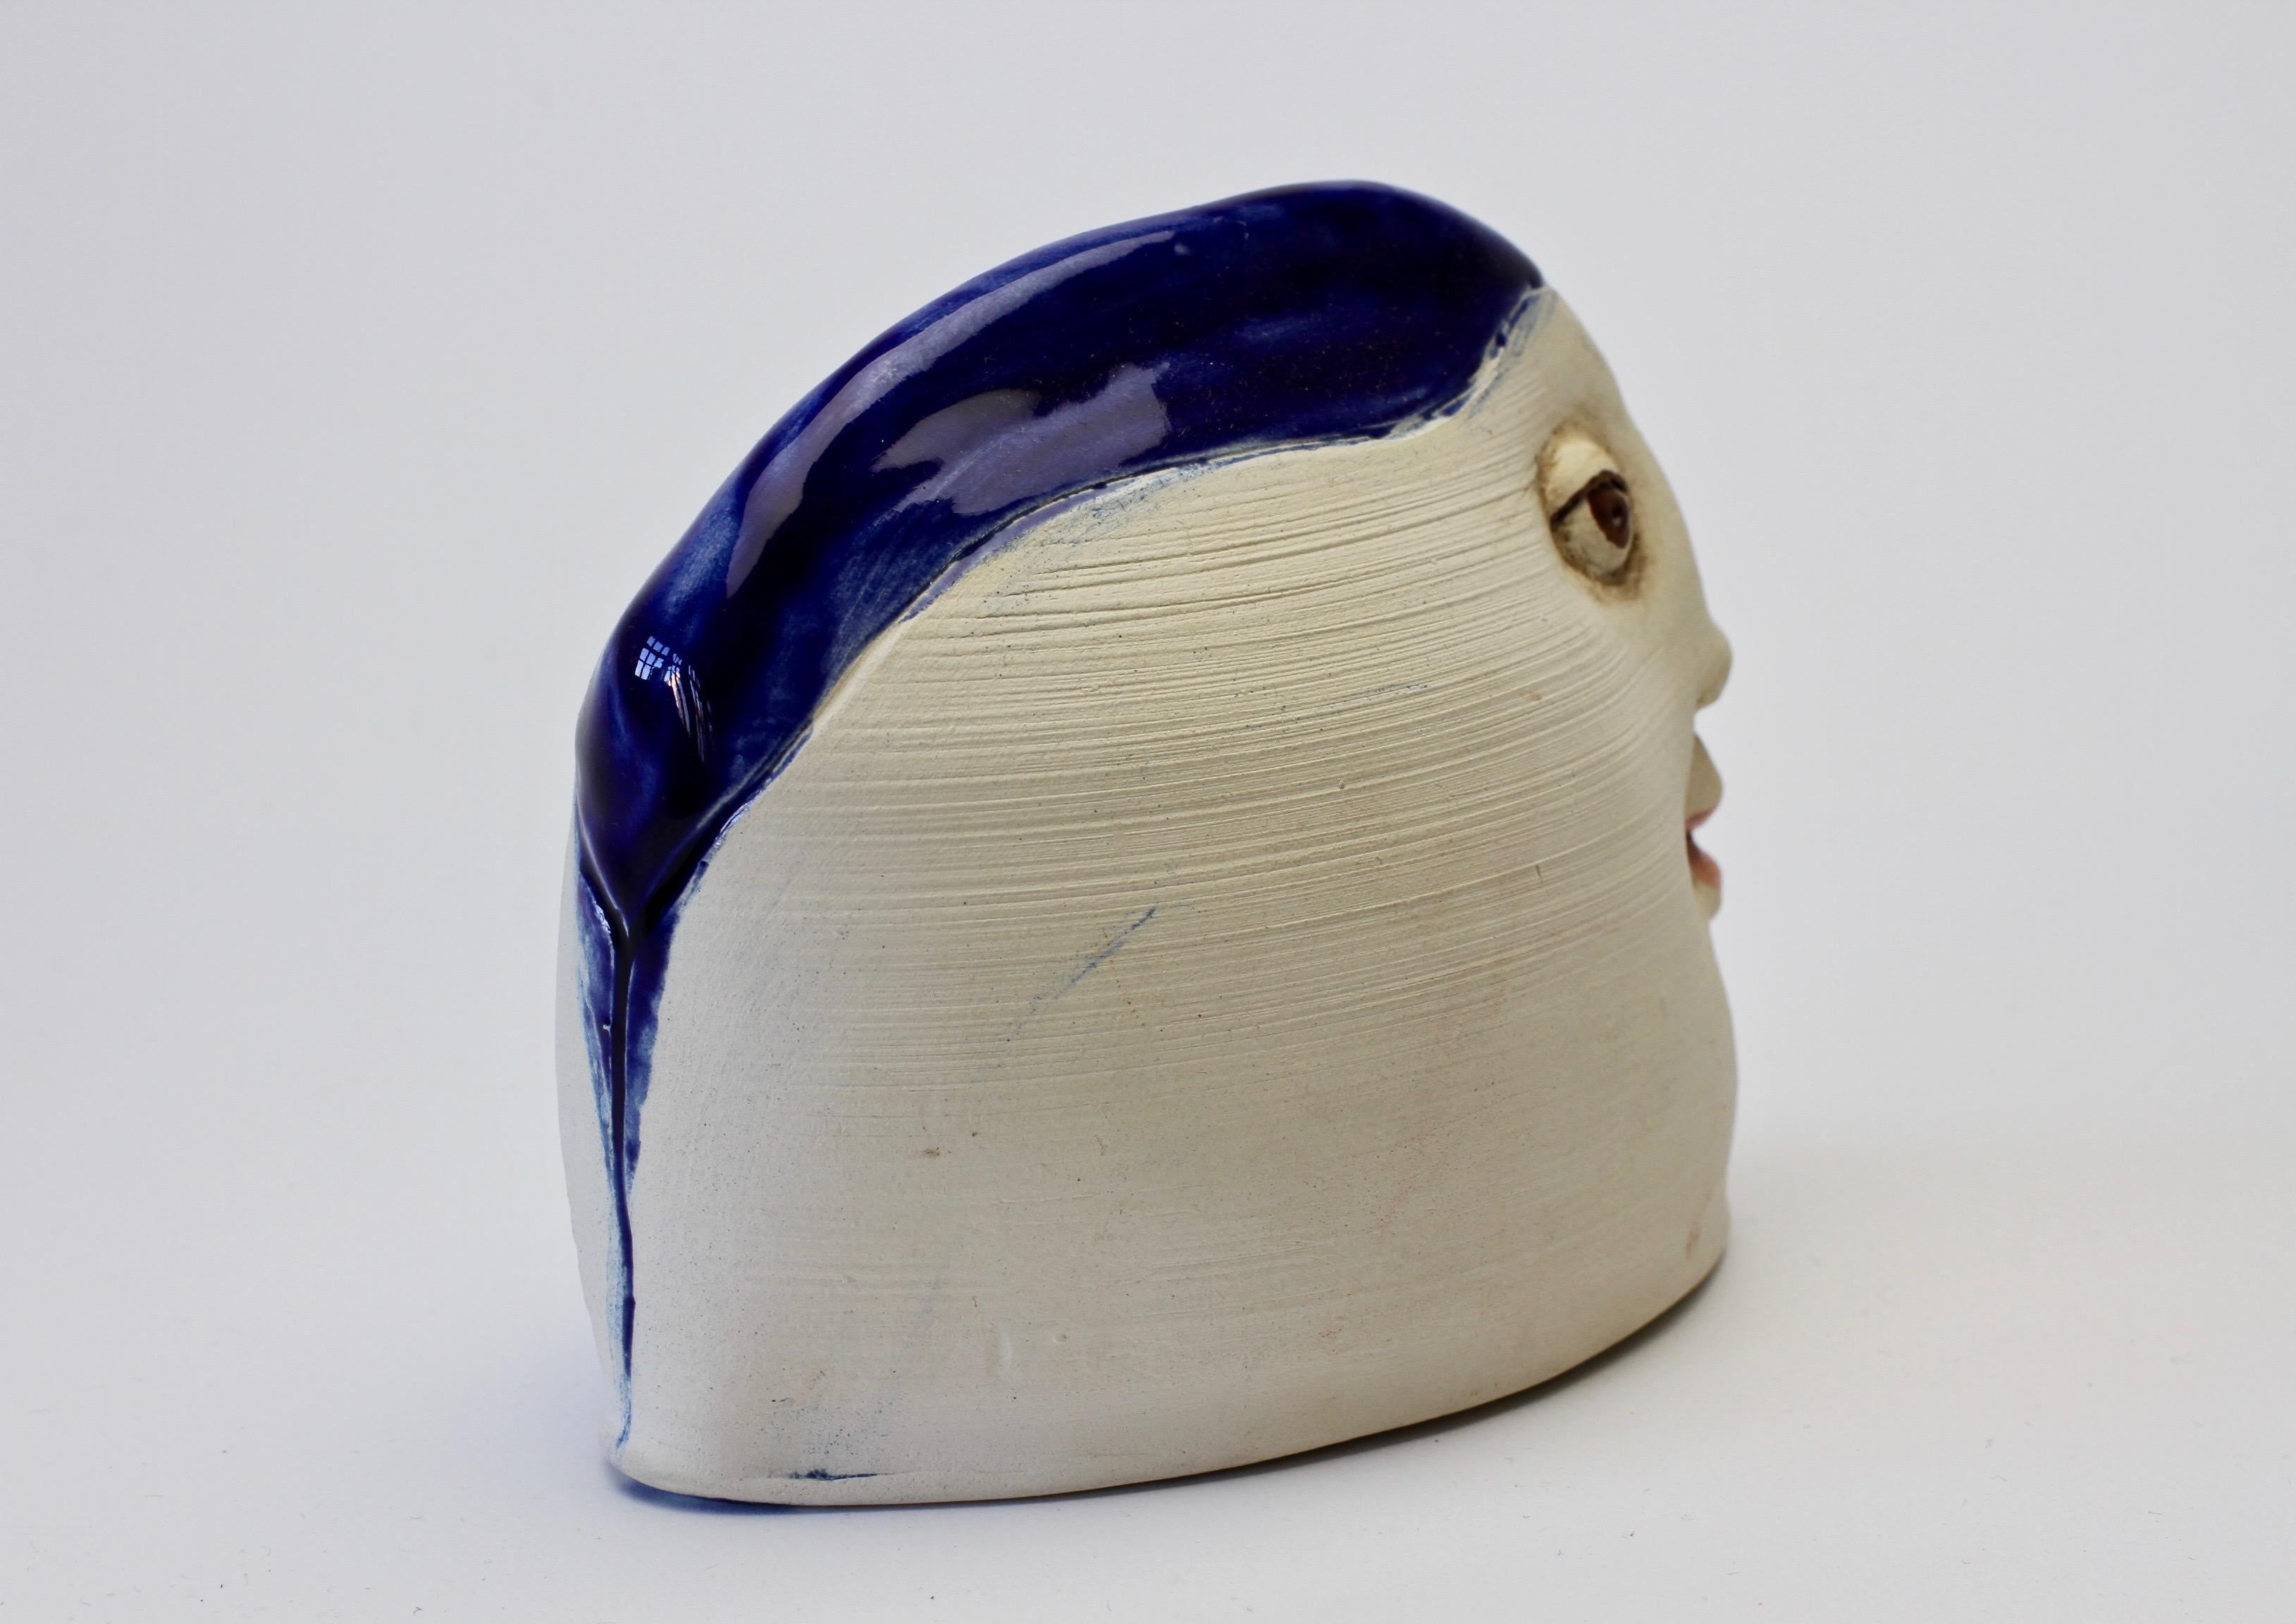 Scandinavian Unusual Quirky Vintage Hand Thrown Glazed Pottery Sculpture of a Head with Face 